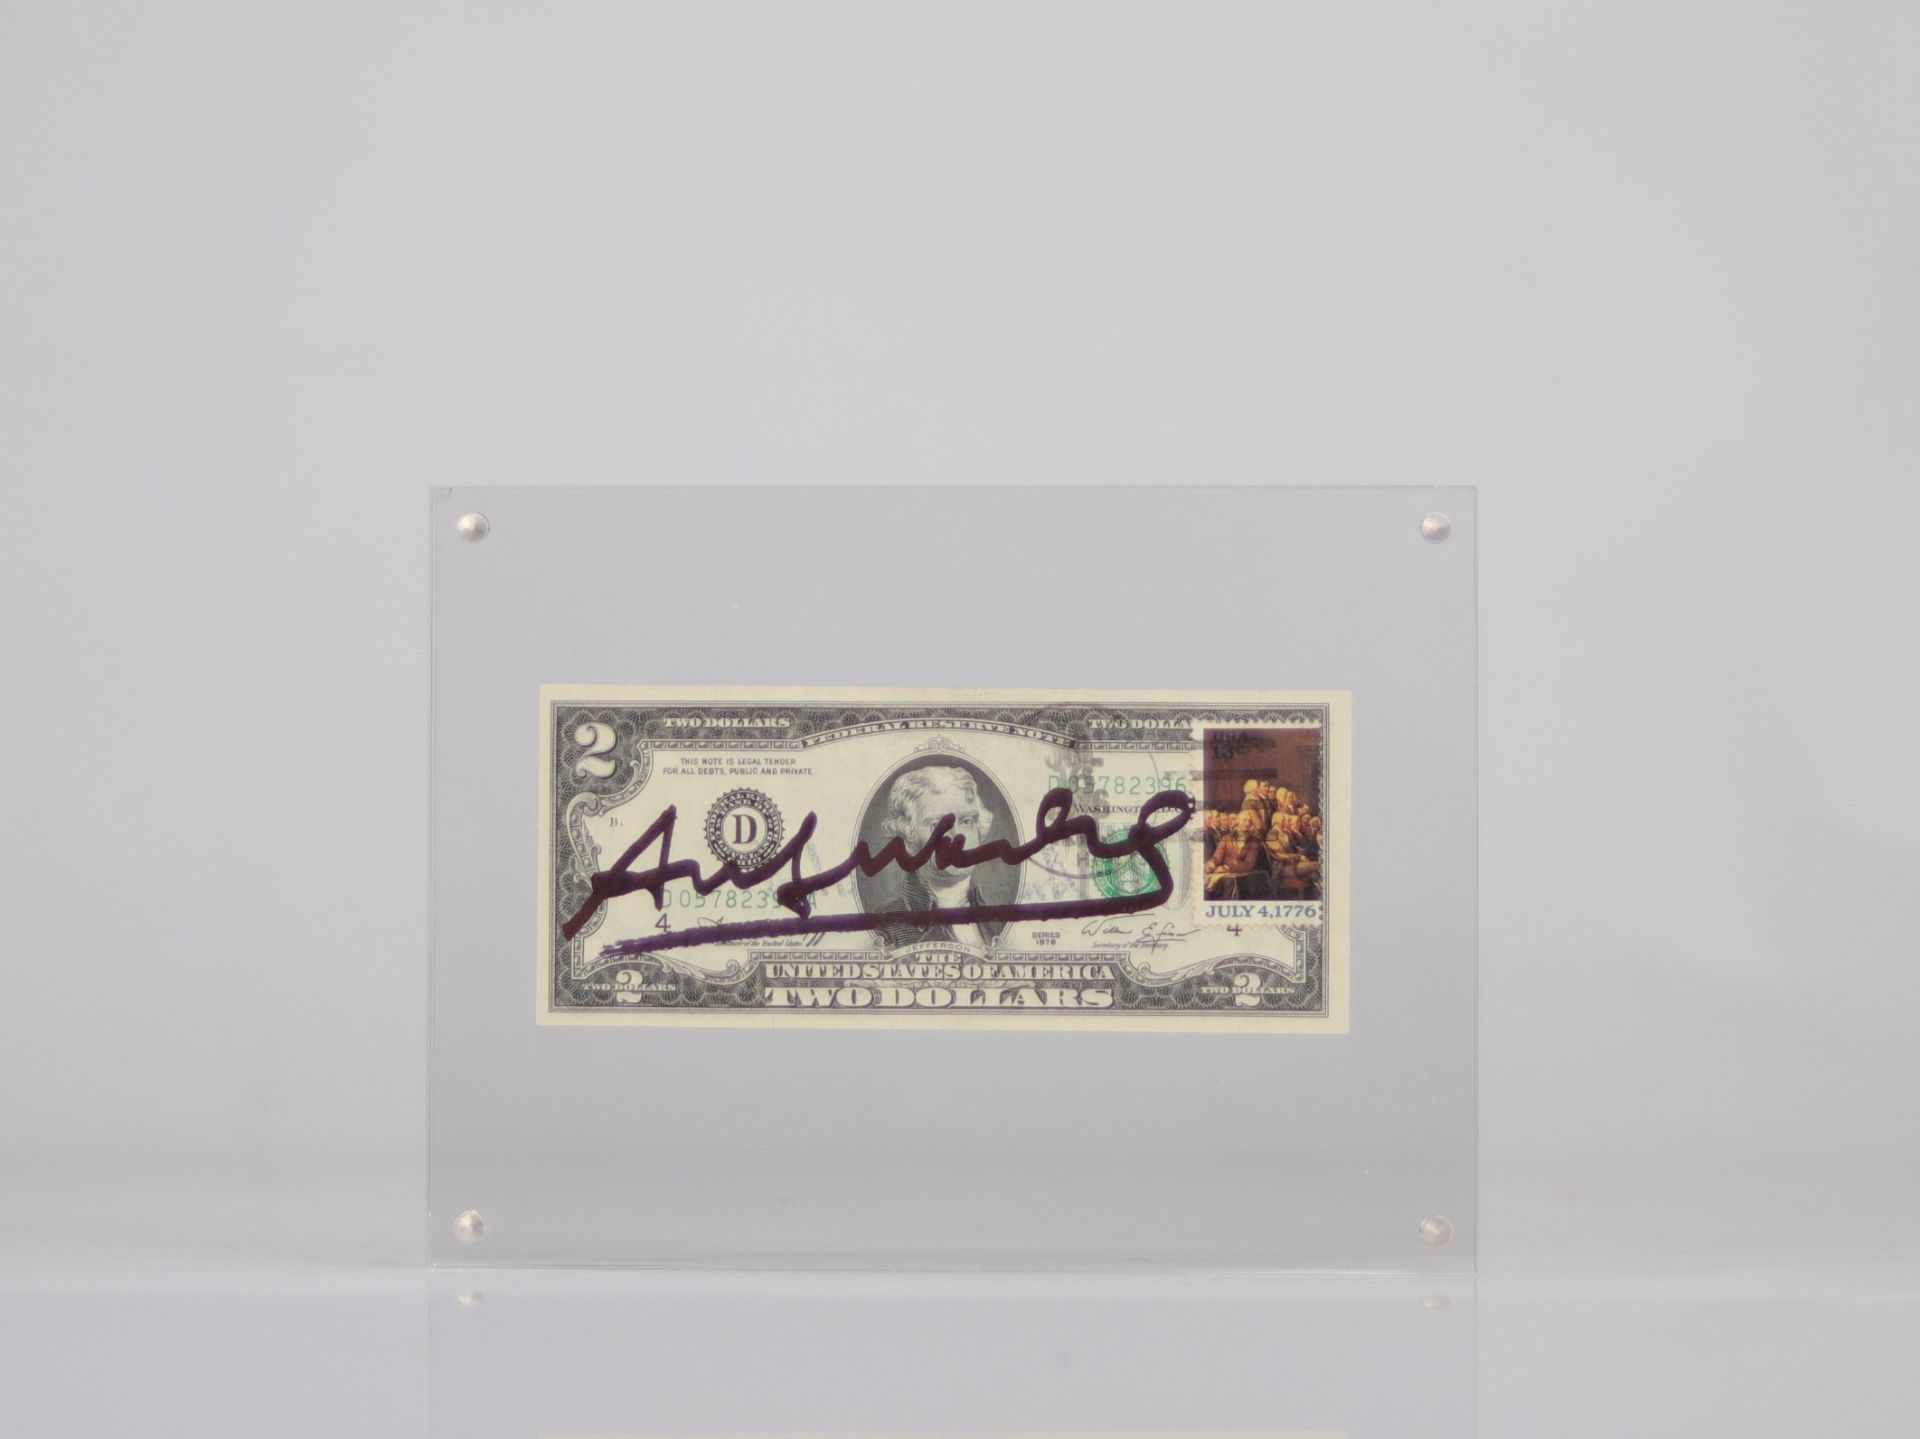 Andy Warhol. 2 dollar bill with the signature of "Andy Warhol" in felt pen.